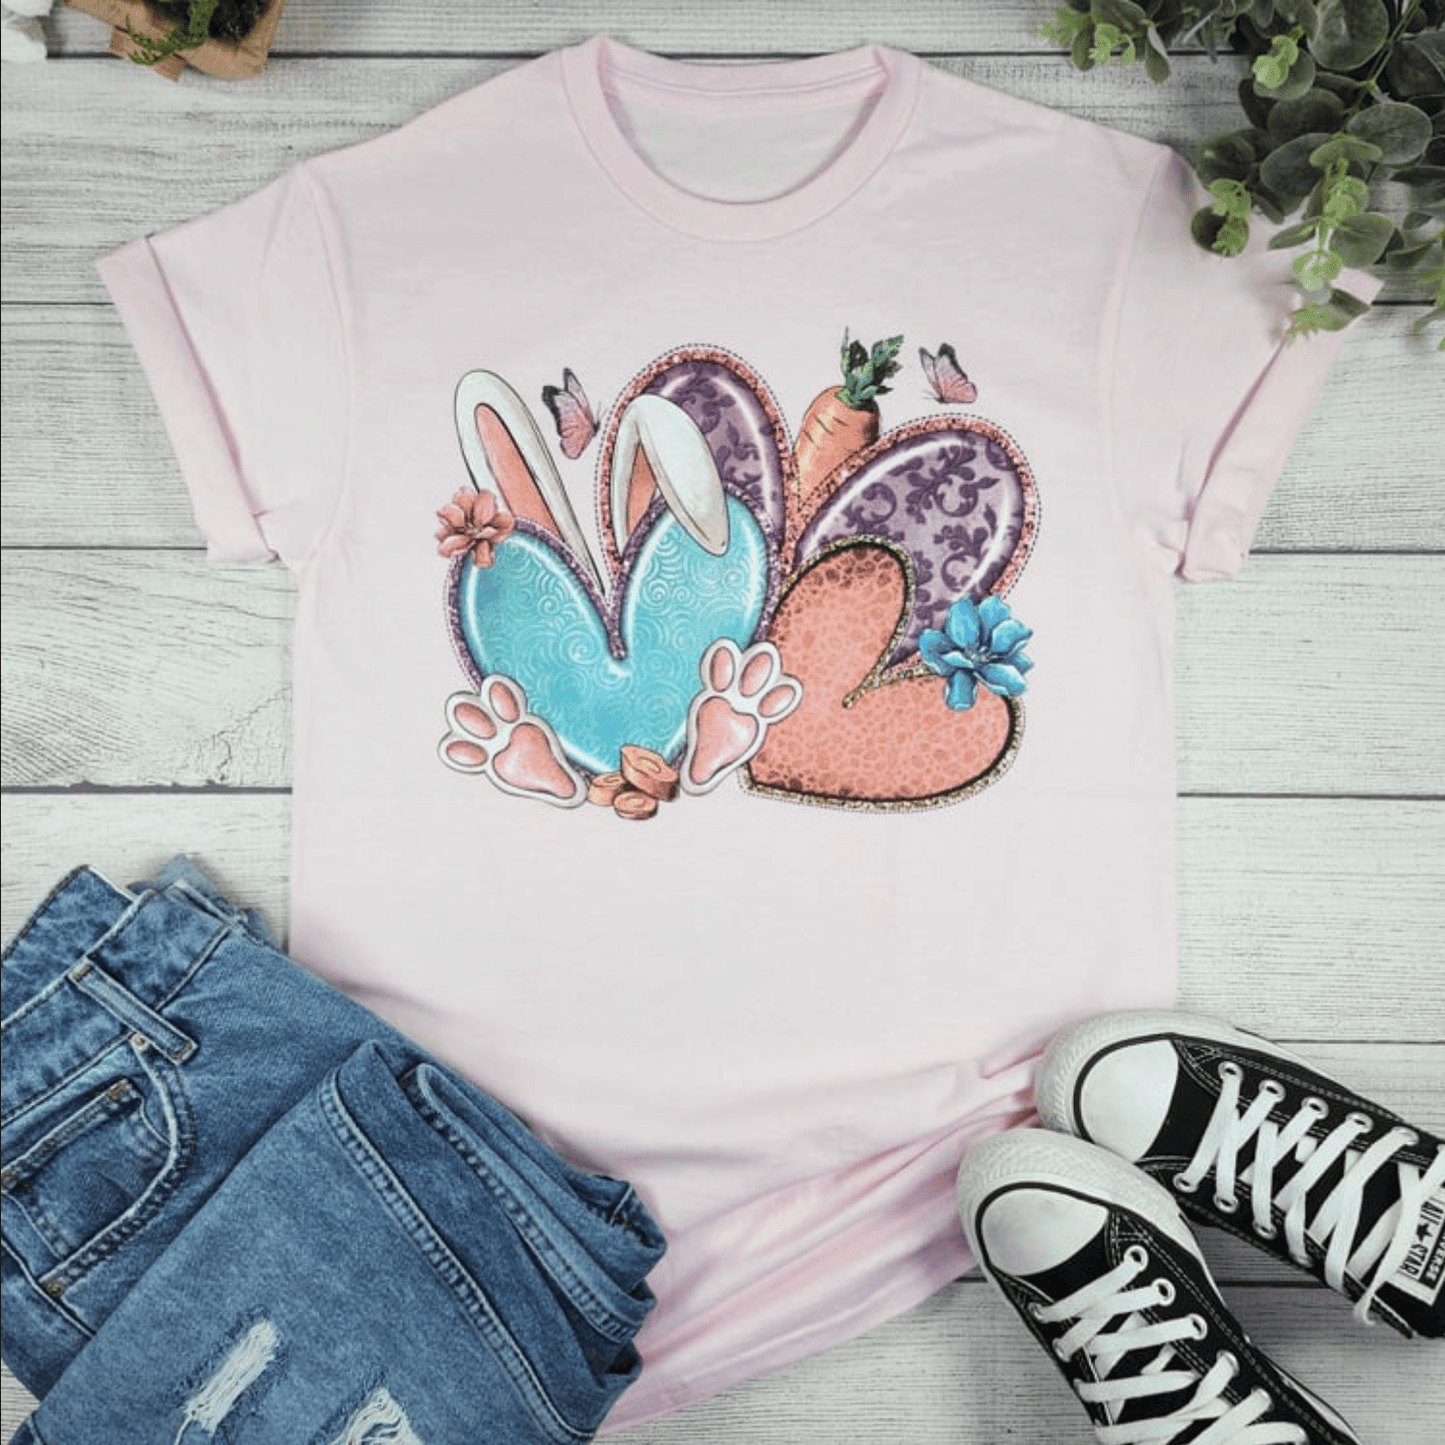 Envy Stylz Boutique Women - Apparel - Shirts - T-Shirts 3 Hearts Easter Graphic Tee